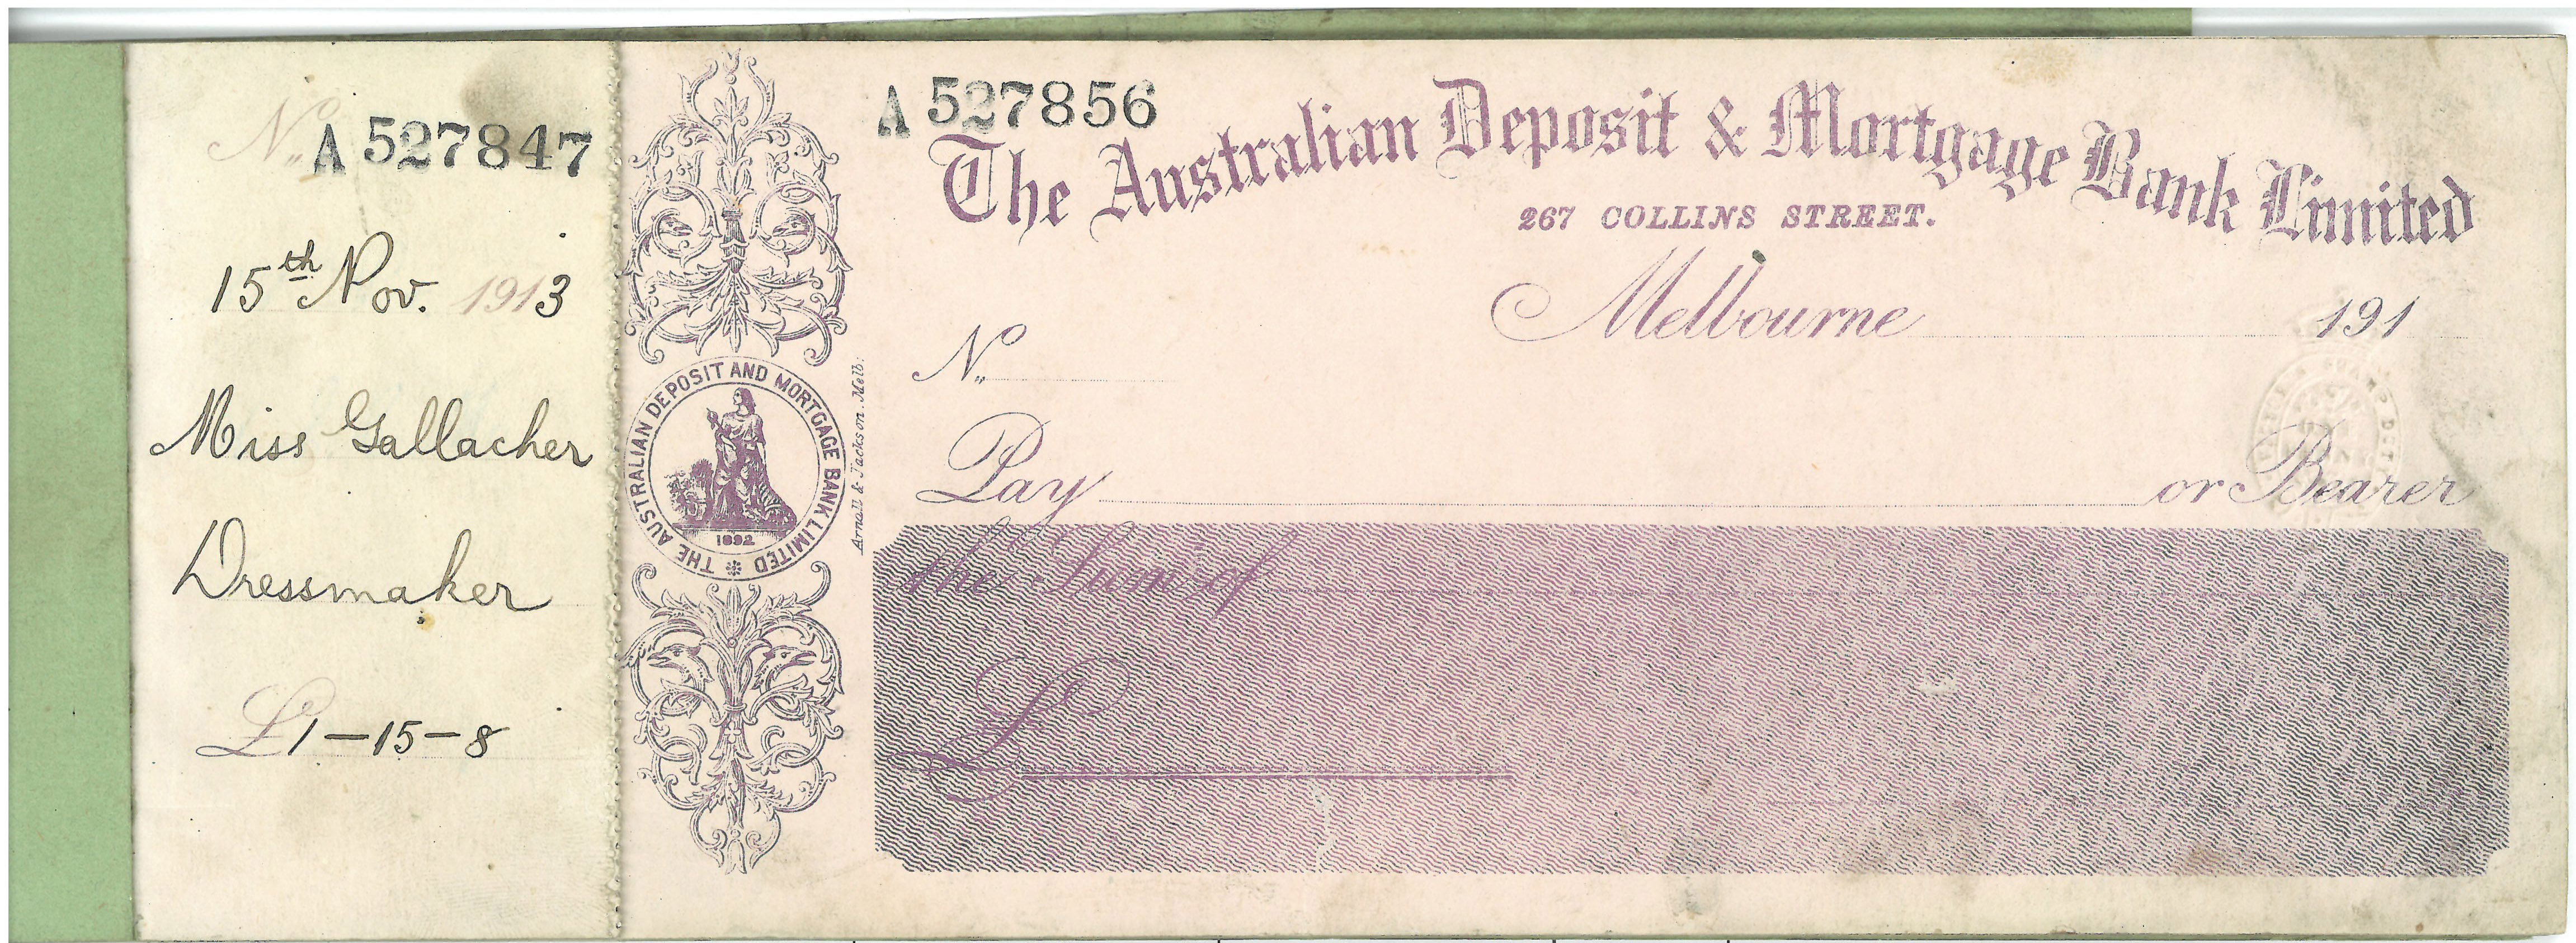 A cheque book from 1913